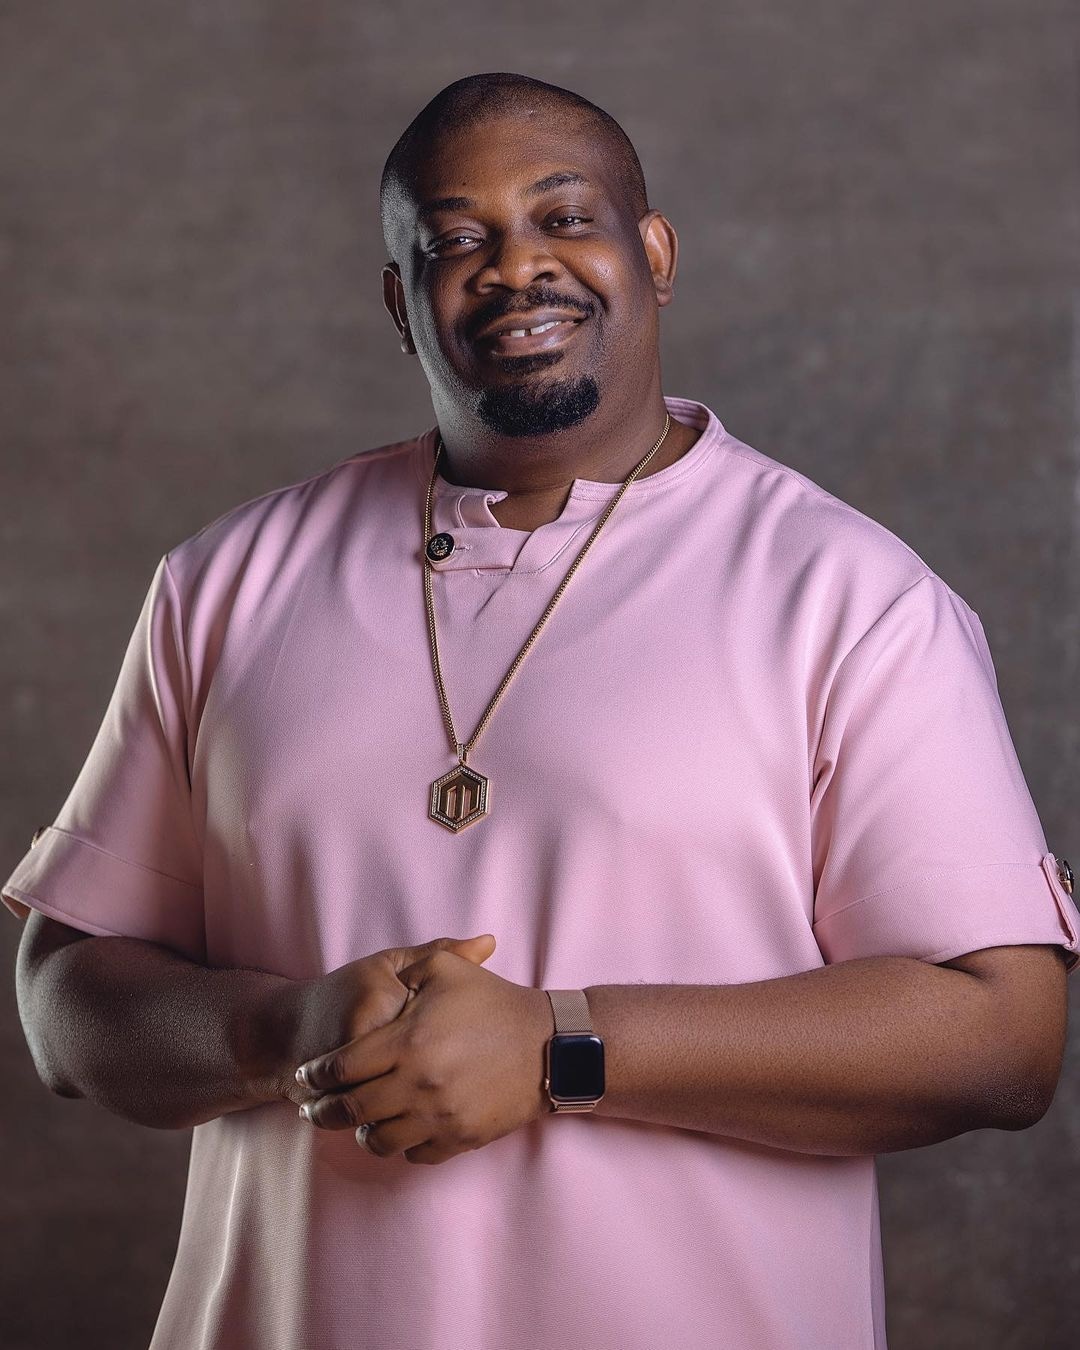 Lady claims Don Jazzy 